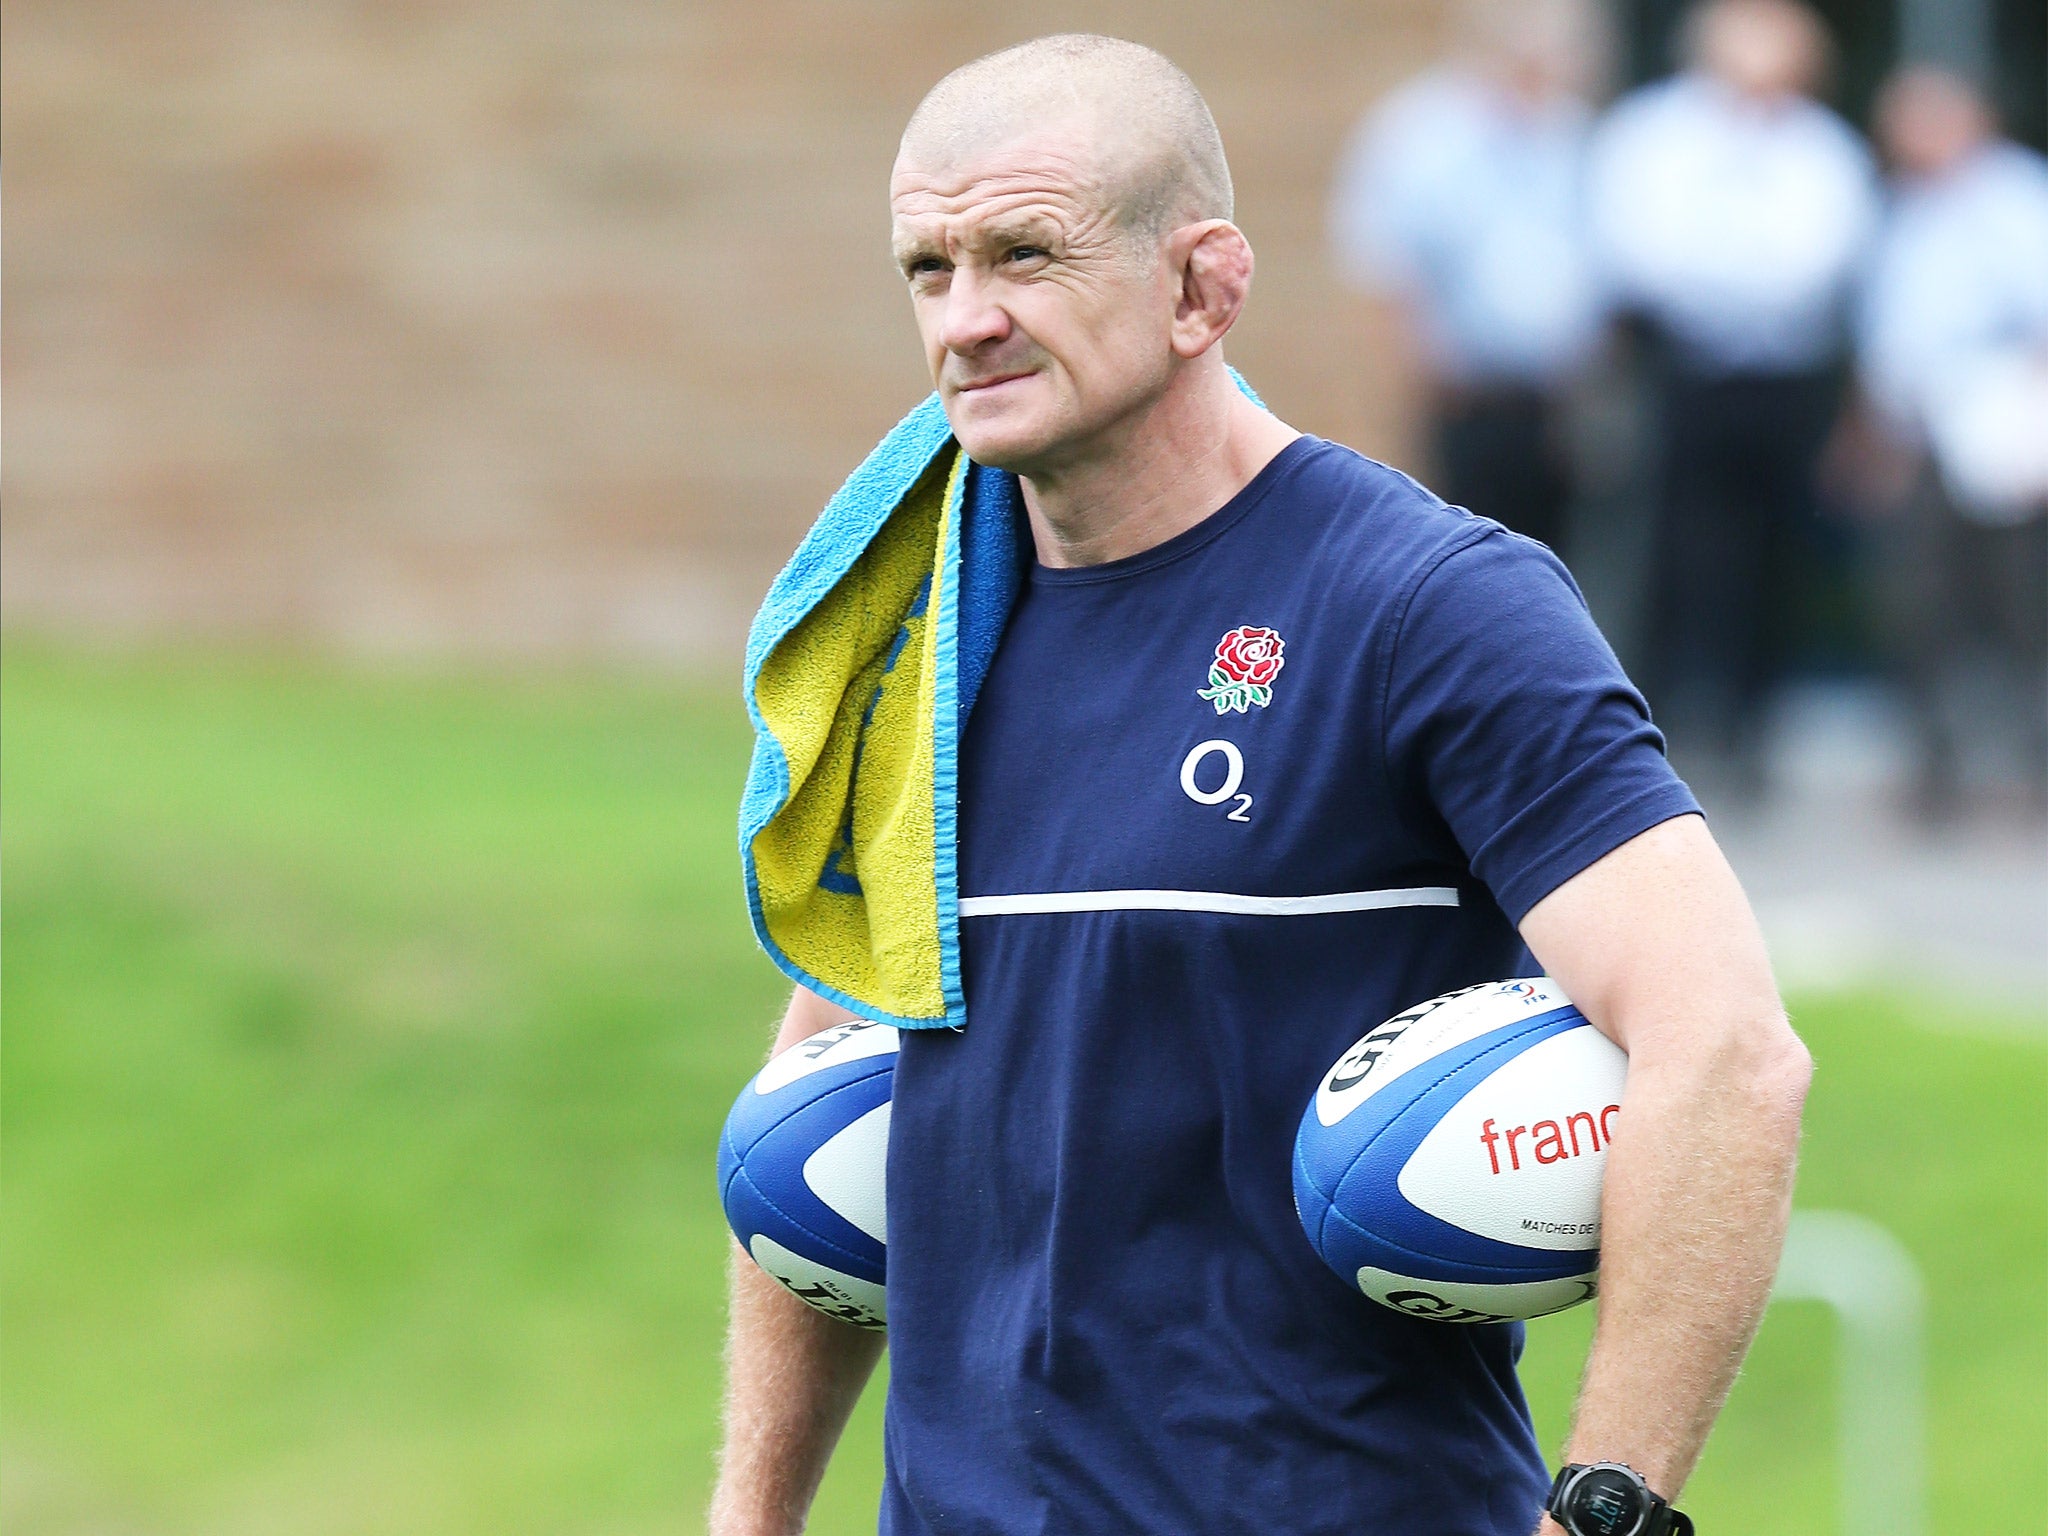 Graham Rowntree, the England forwards coach